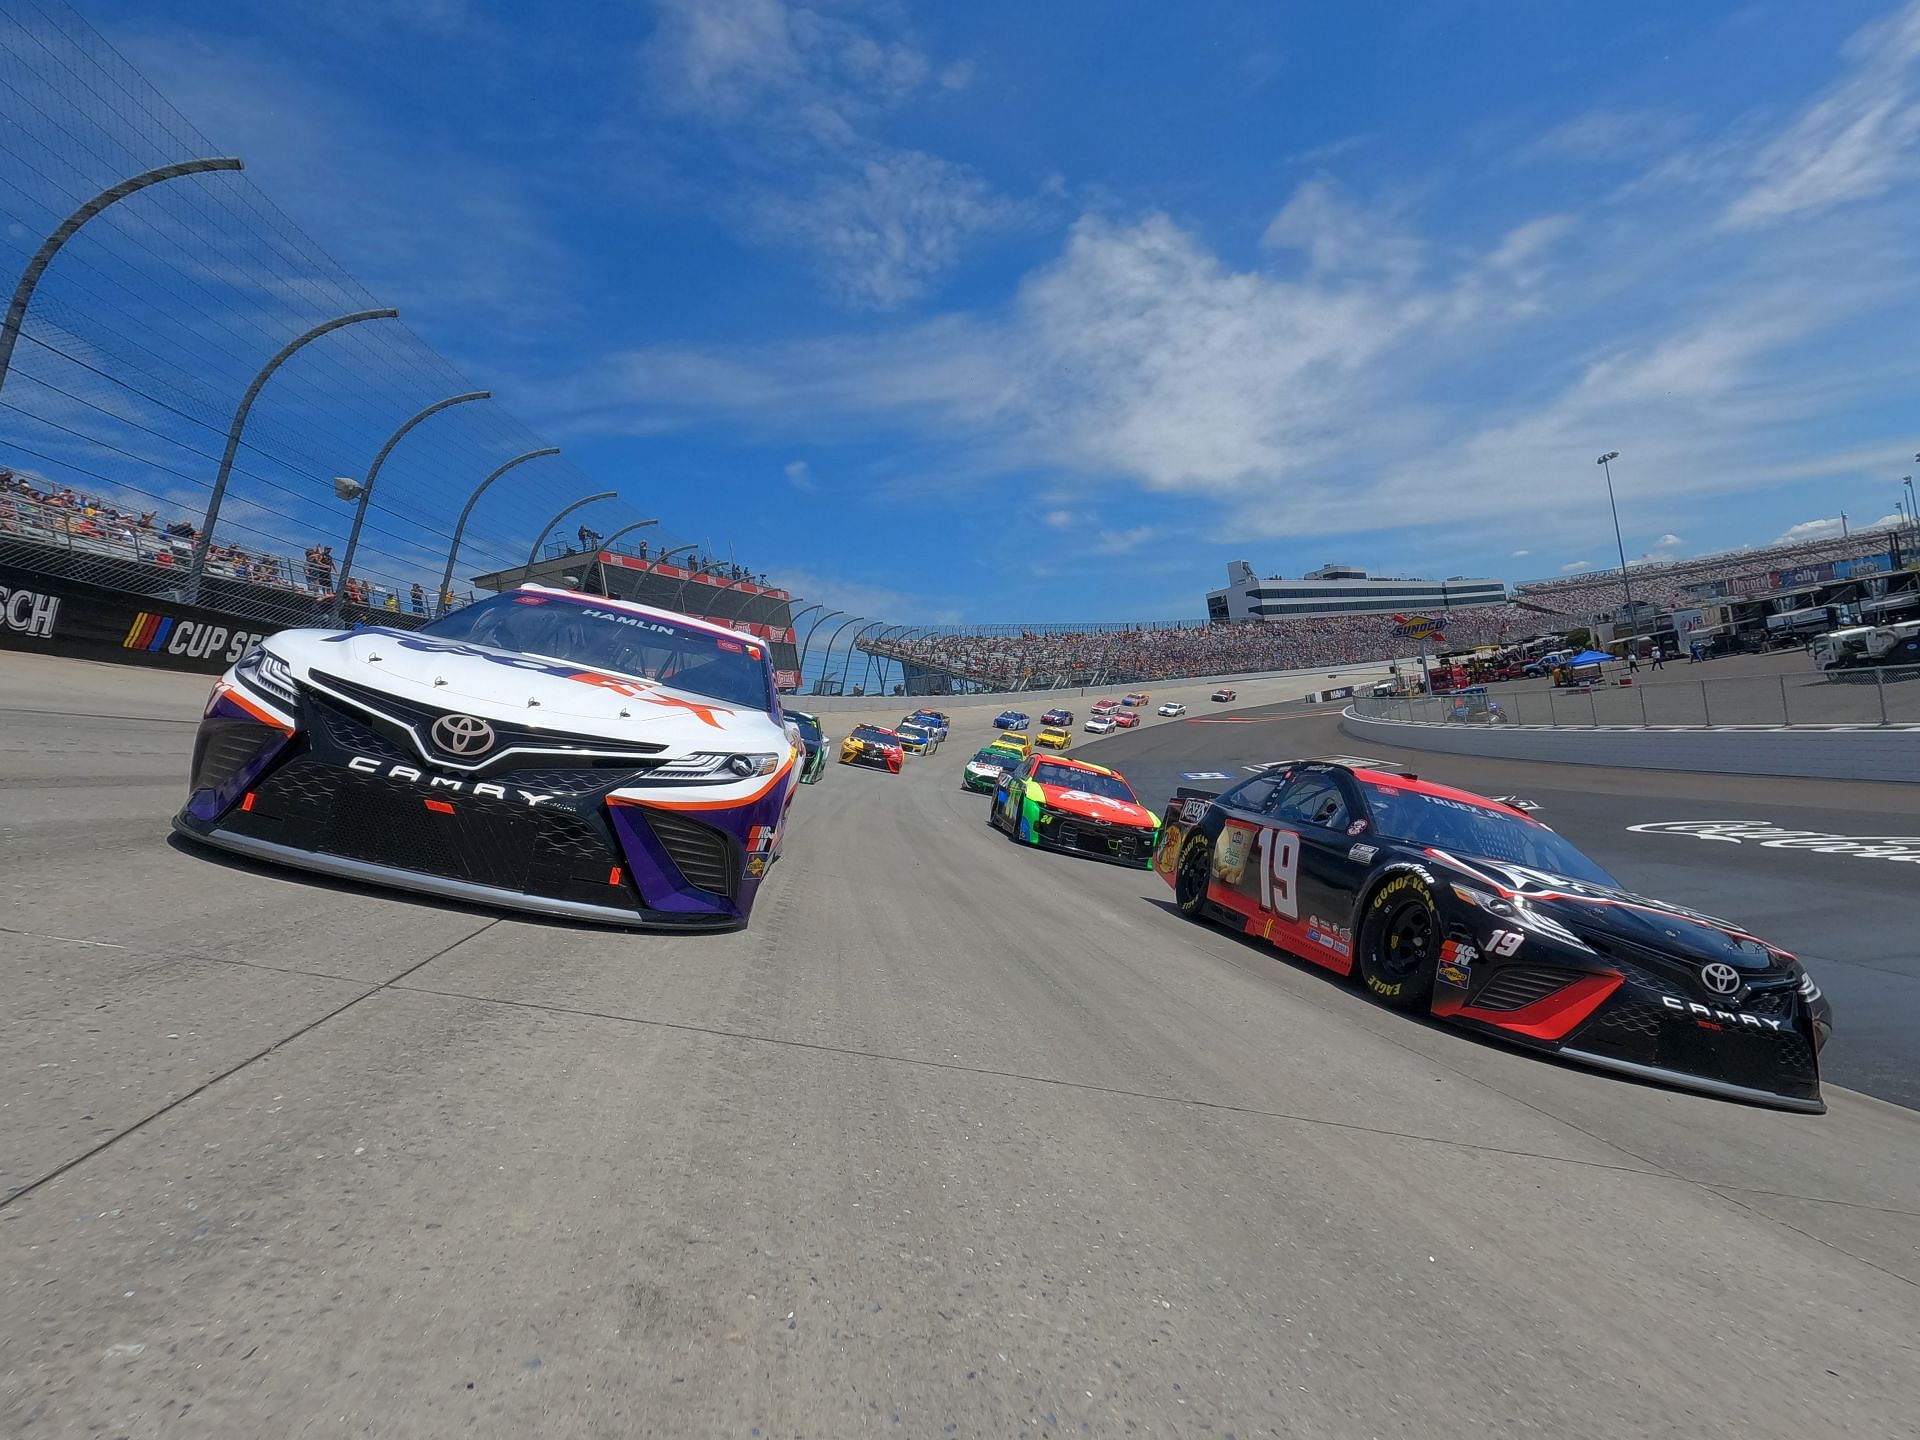 NASCAR 2022 at Dover: Race schedule and timings for DuraMAX Drydene 400